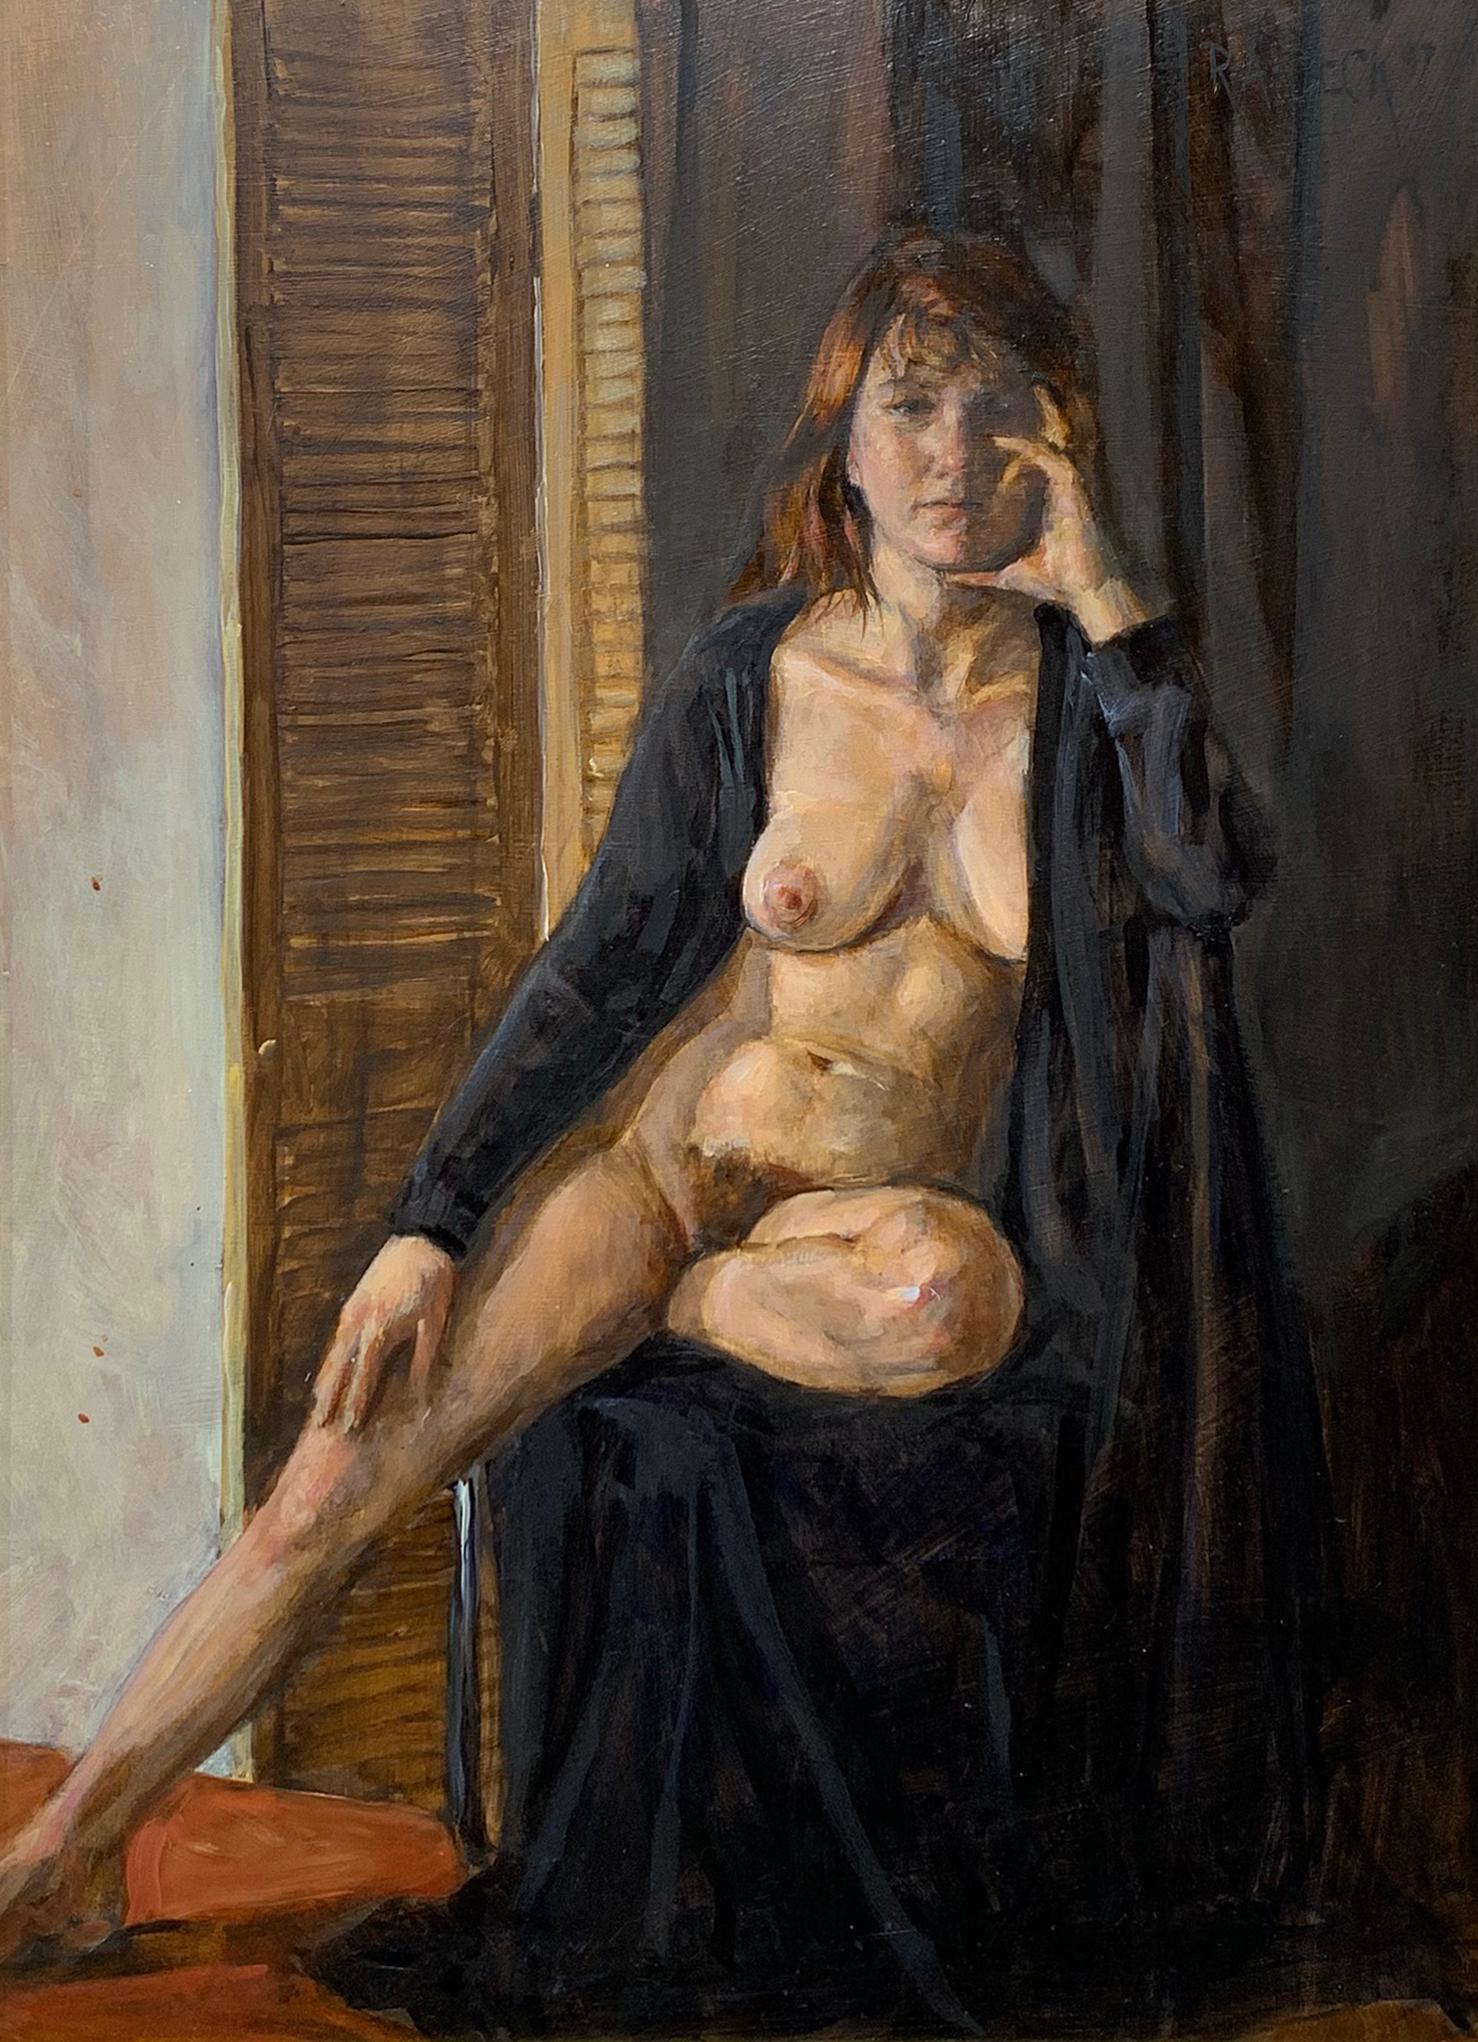 Reds, Nude Portrait of a Woman posed on a Chair